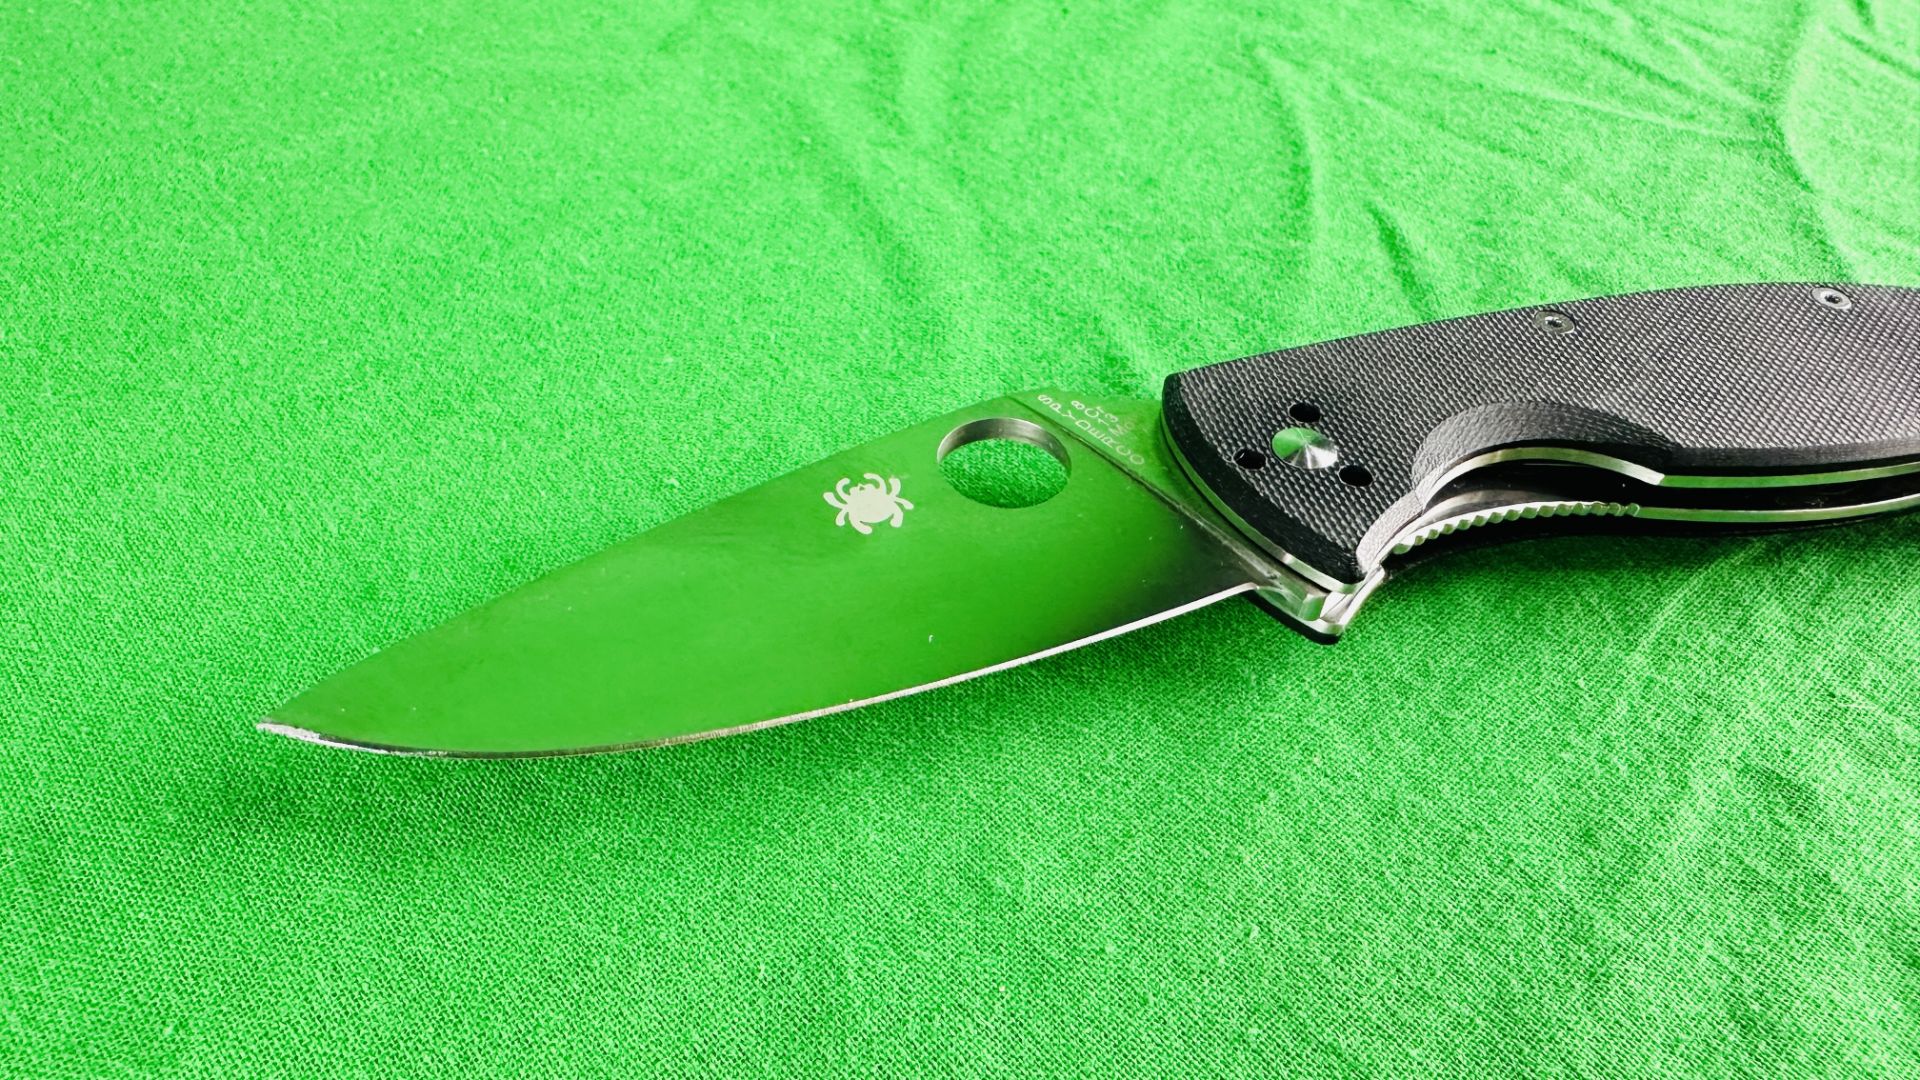 SPYDERCO TENACIOUS C122GP FOLDING POCKET LOCK KNIFE - NO POSTAGE OR PACKING AVAILABLE - Image 3 of 6